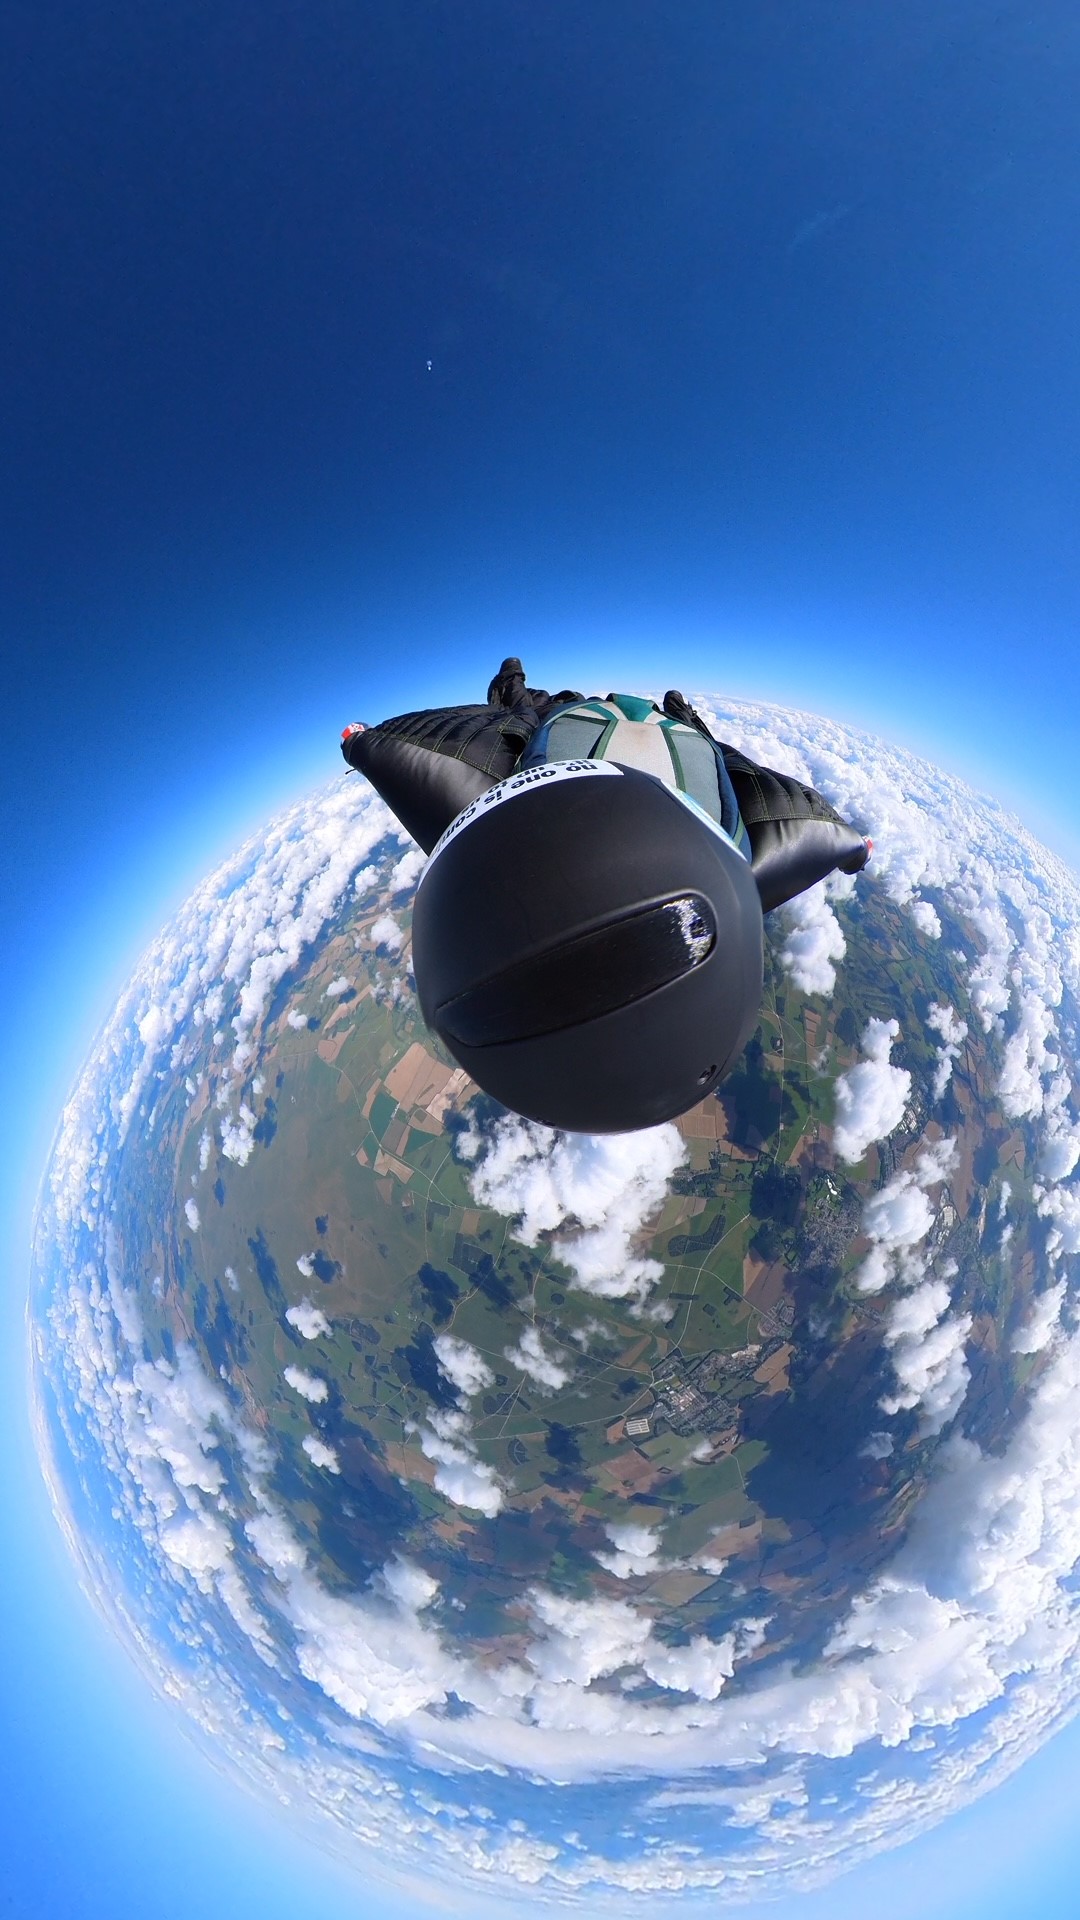 A skydiver in freefall with the curvature of the Earth pictured below him.